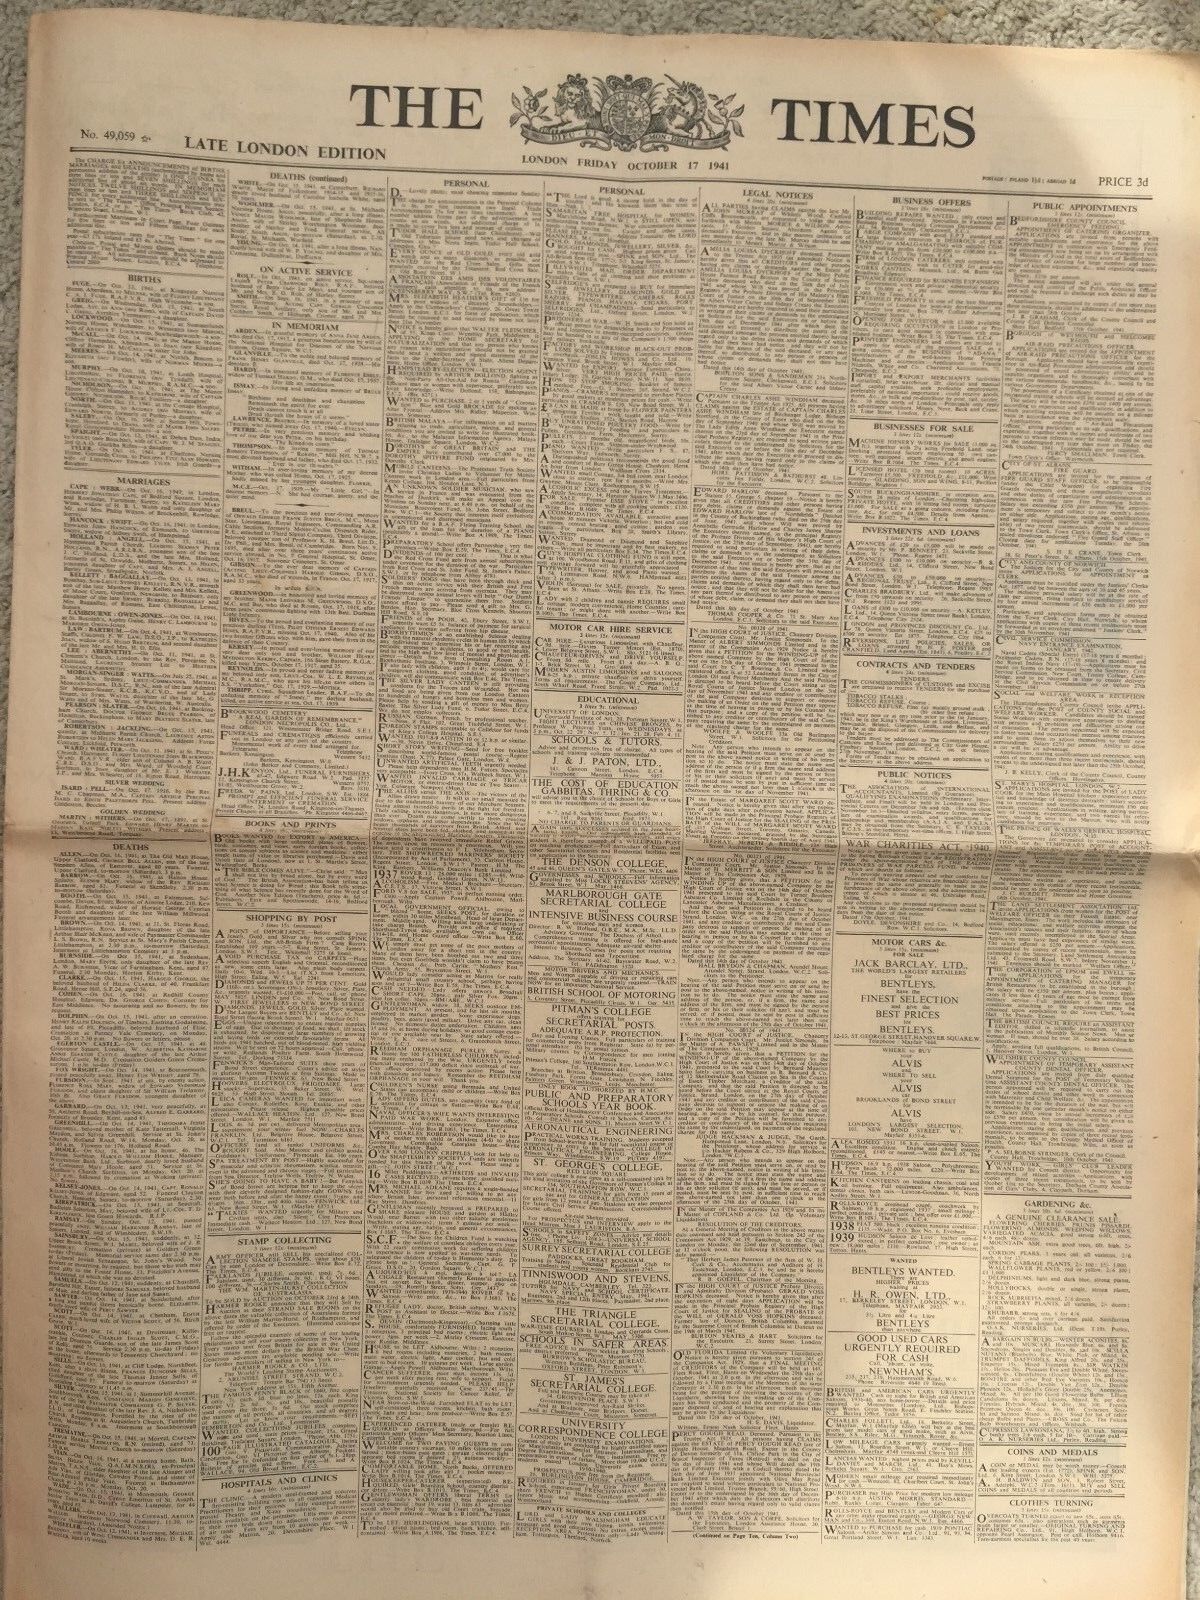 The Times Newspaper 27th May 1944